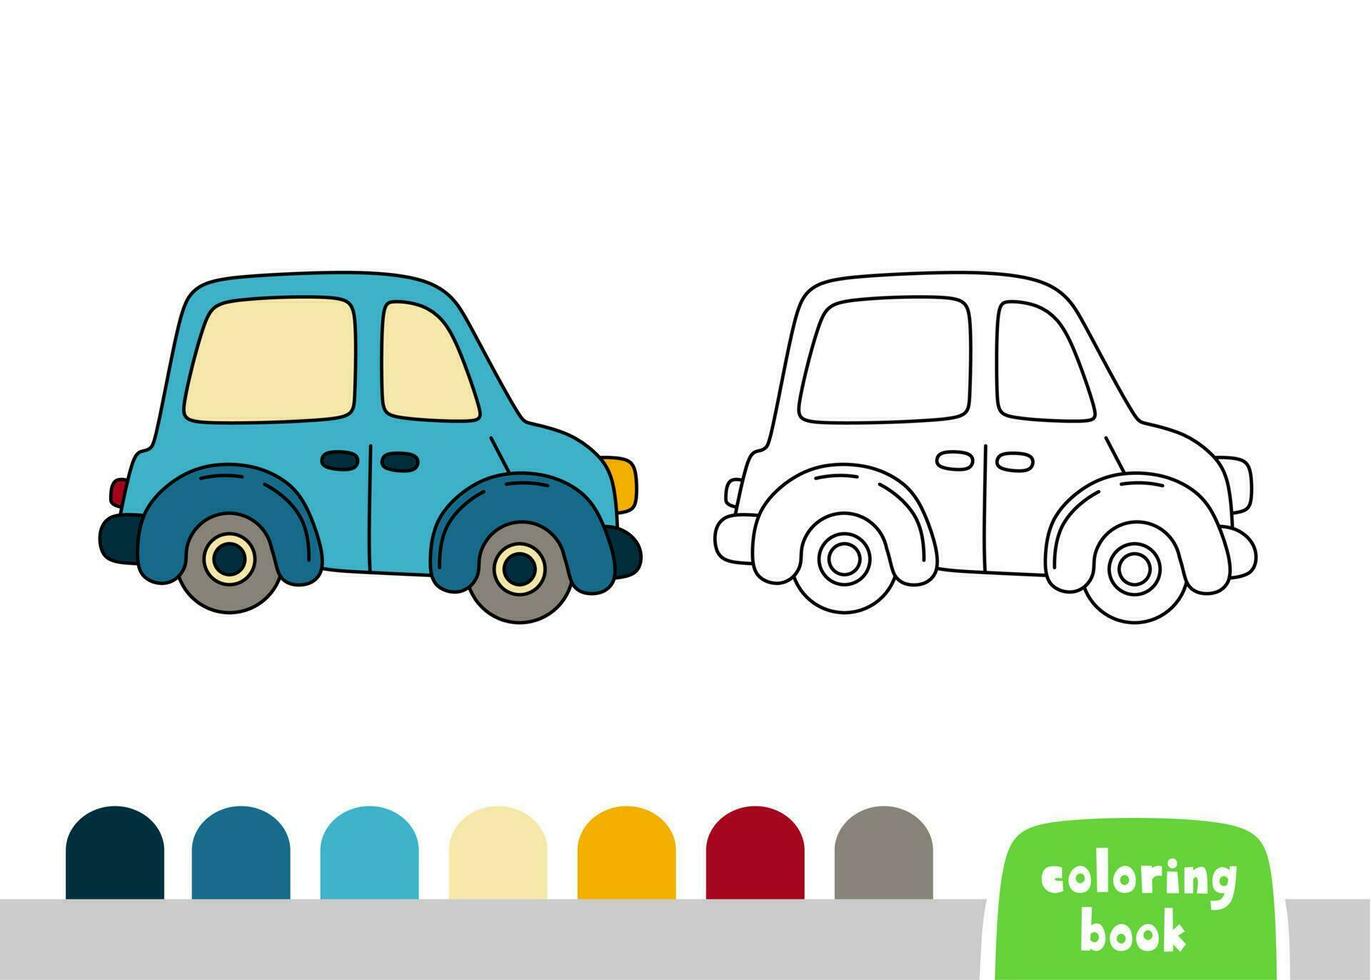 Car Coloring Book for Kids Page for Books, Magazines, Doodle Vector Illustration Template